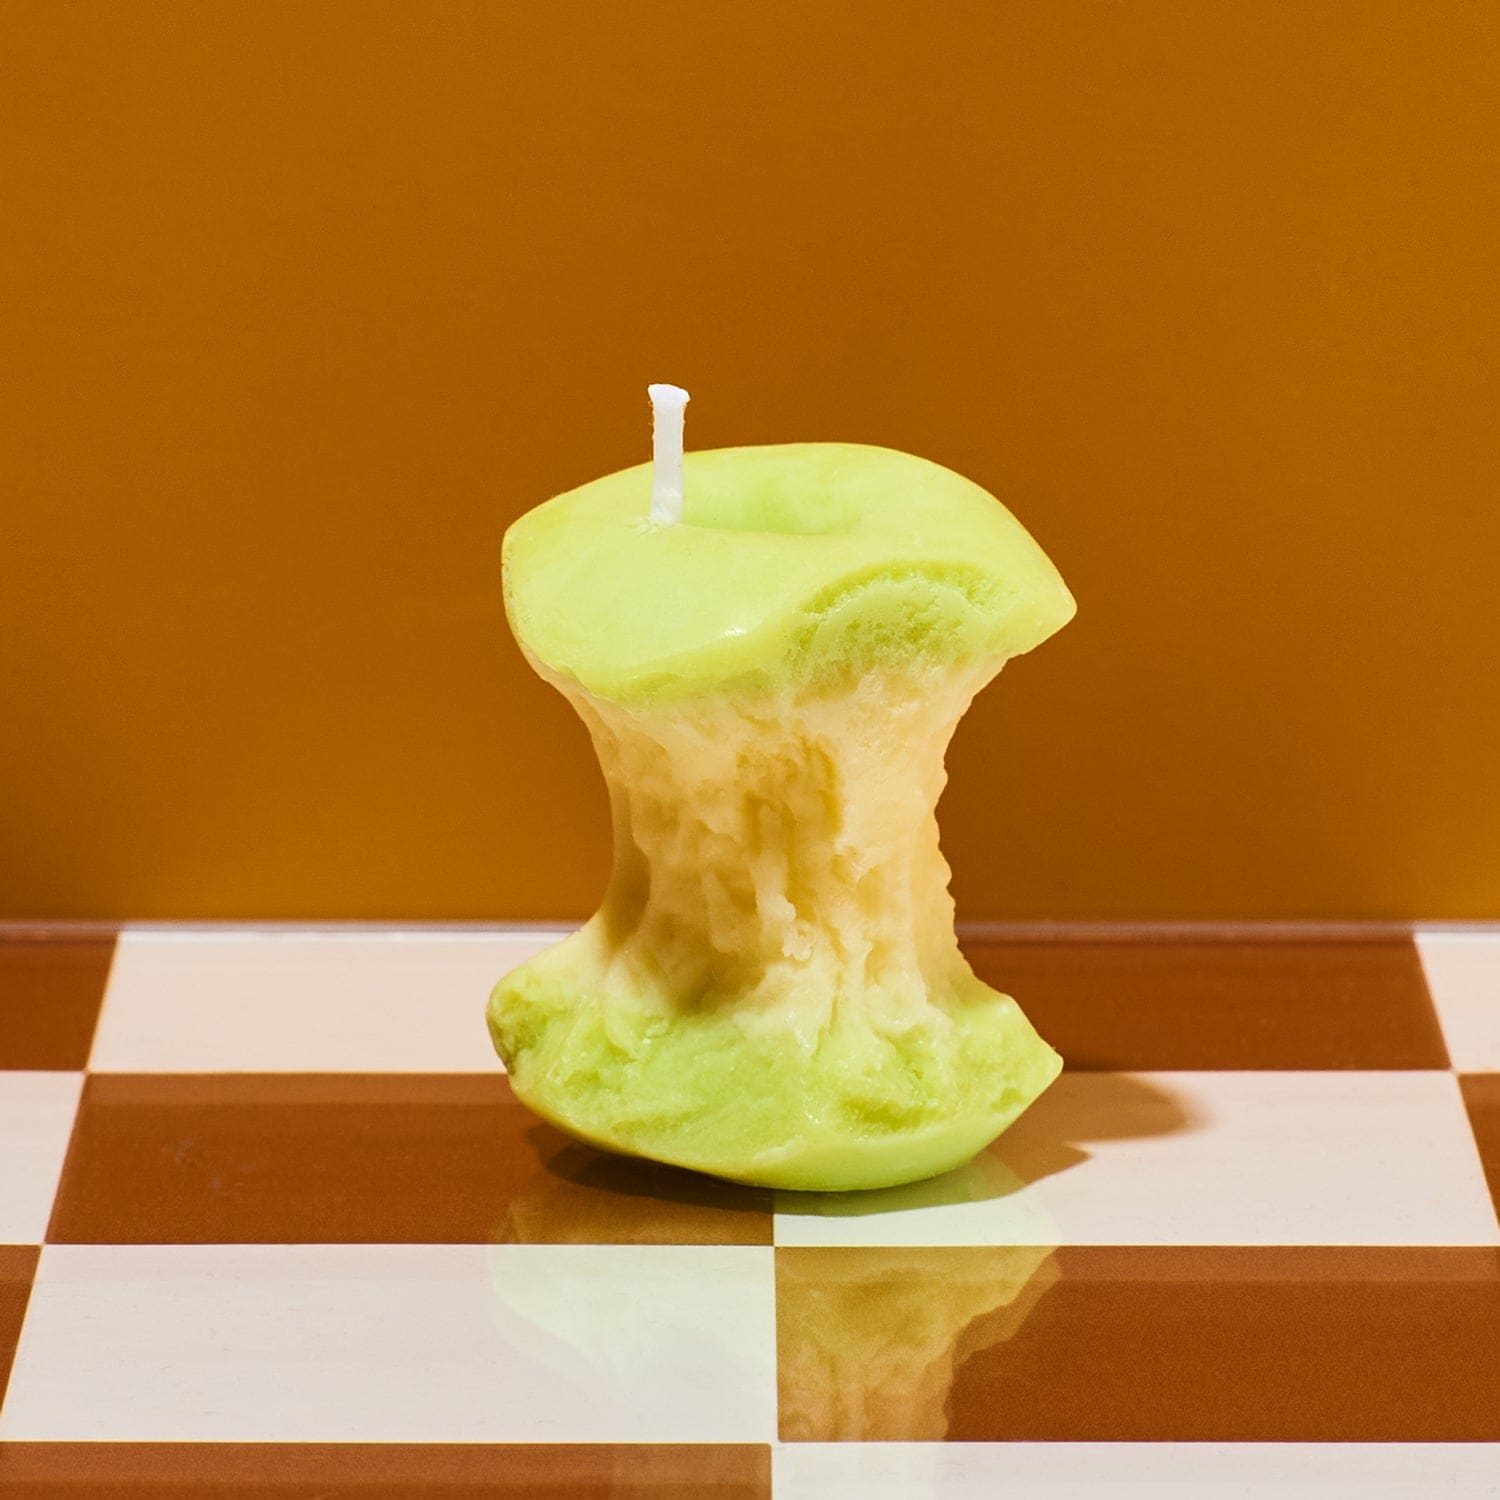 Bitten Apple Candle - Unscented Apple - Candle - Fake Food